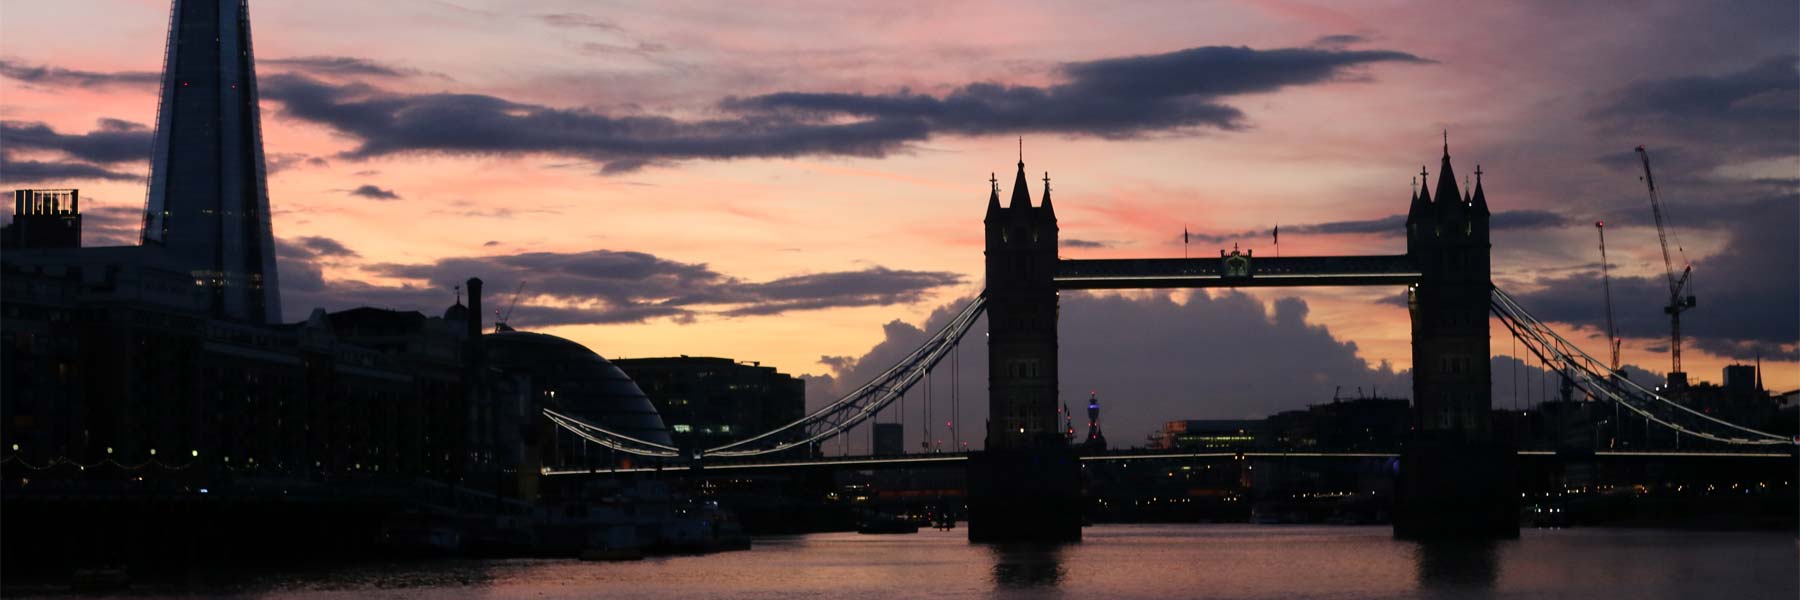 2019 Events & Cruises on London's River Thames